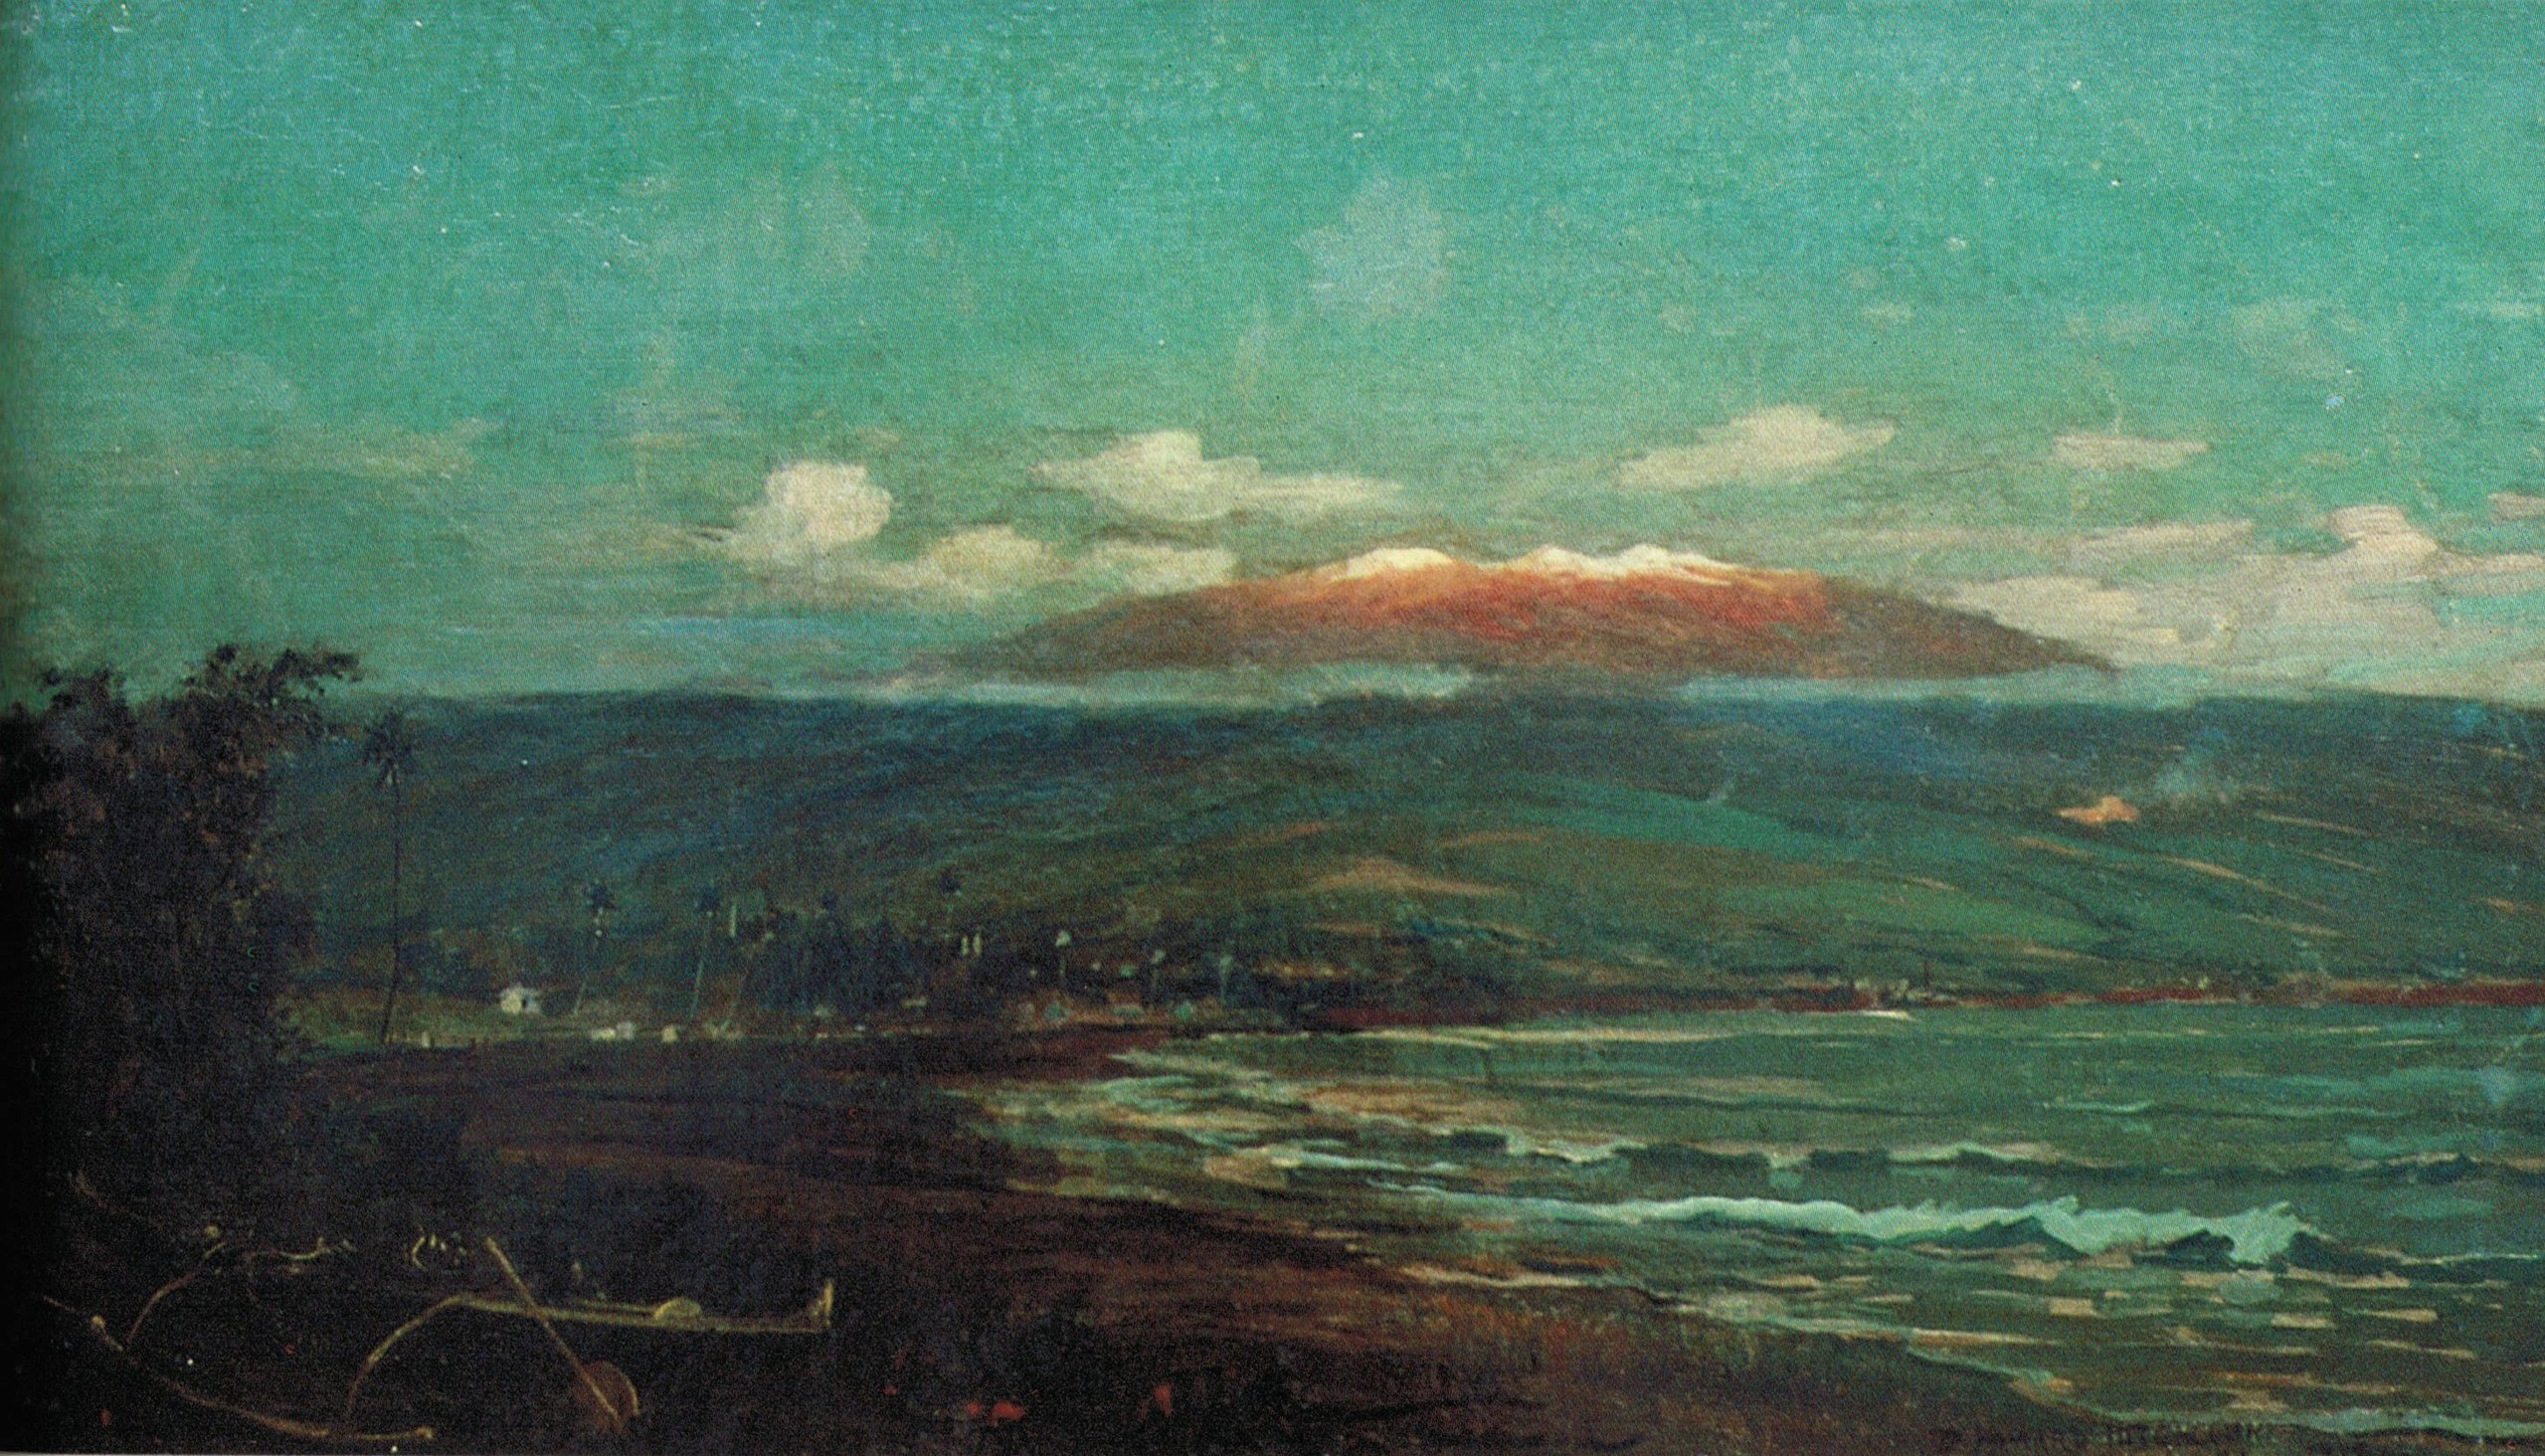 2560px-'Mauna_Kea_from_Hilo_Bay'_by_D._Howard_Hitchcock,_1887